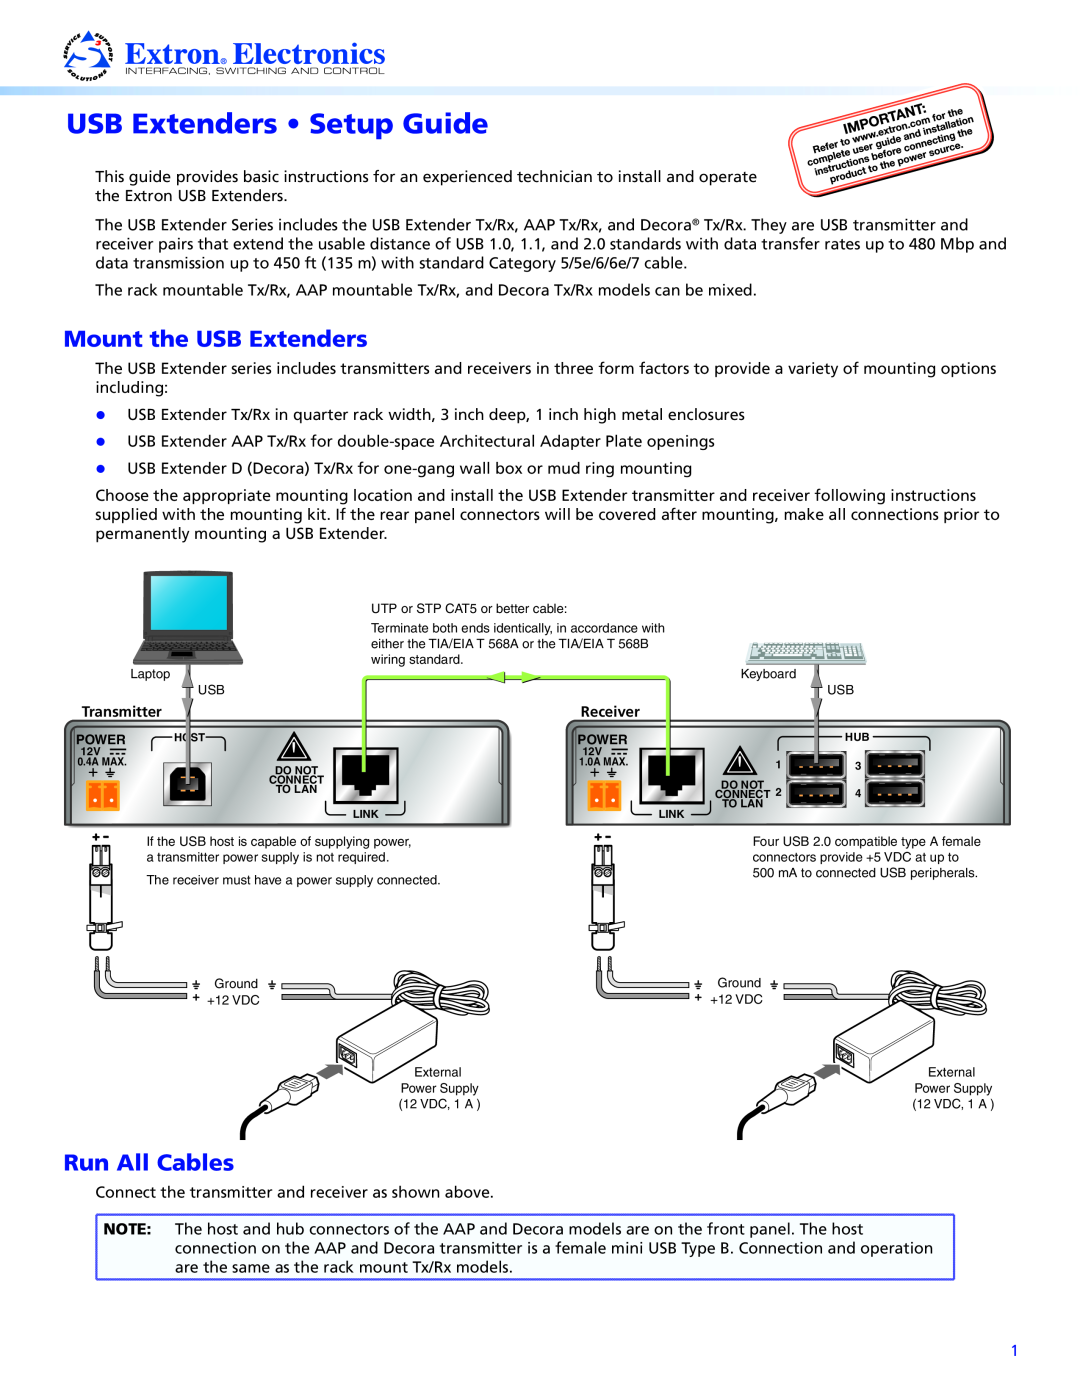 Extron electronic AAP TX/RX, DECORA TX/RX setup guide Mount the USB Extenders, Run All Cables, USB Extenders Setup Guide 